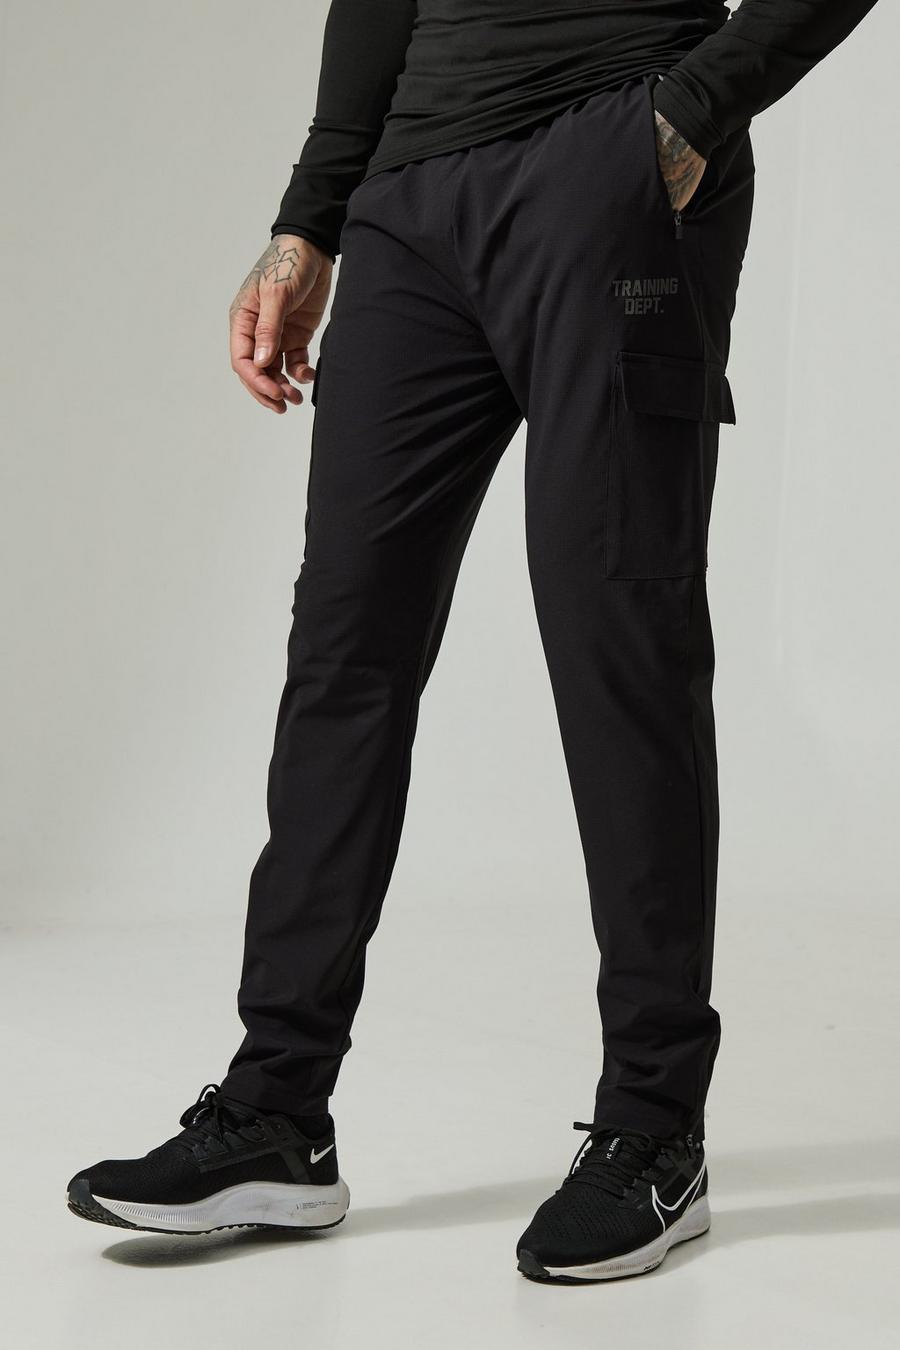 Black Tall Active Training Dept Tapered Cargo Joggers